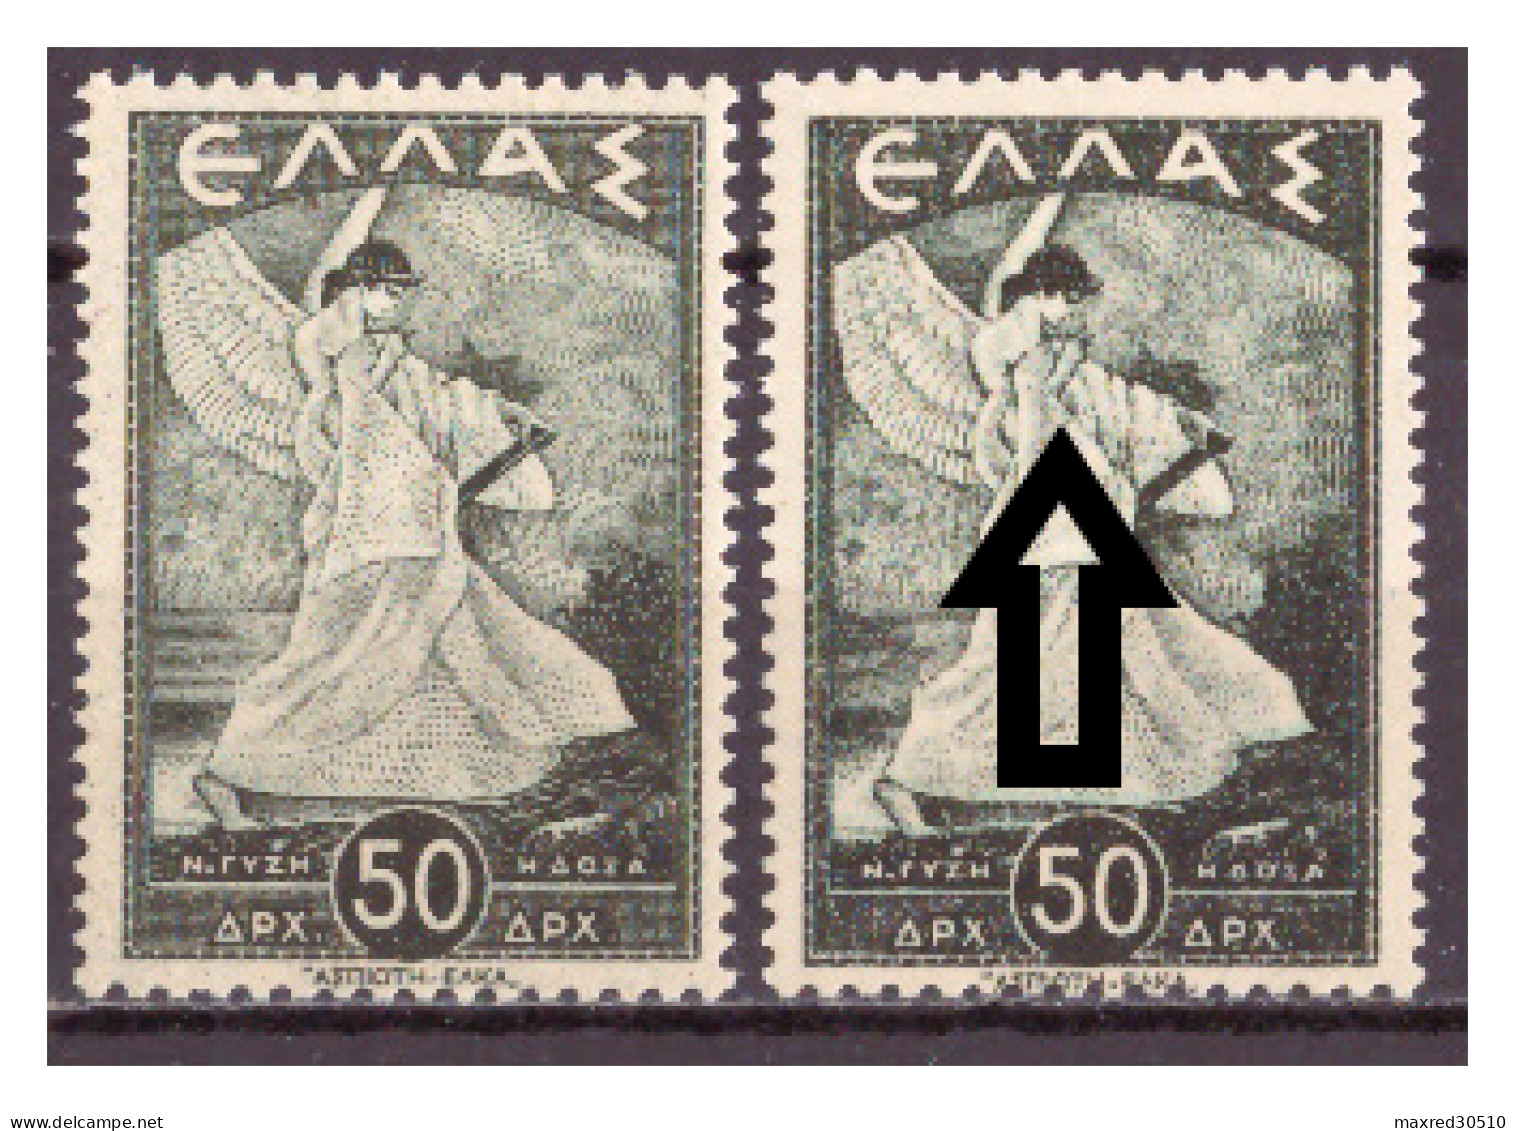 GREECE 1945 2X50L. OF THE "GLORY ISSUE" THE 2ND ONE (SEE ARROWS) WITH MIRROR PRINTING AT THE GUM ERROR MNH - Variedades Y Curiosidades